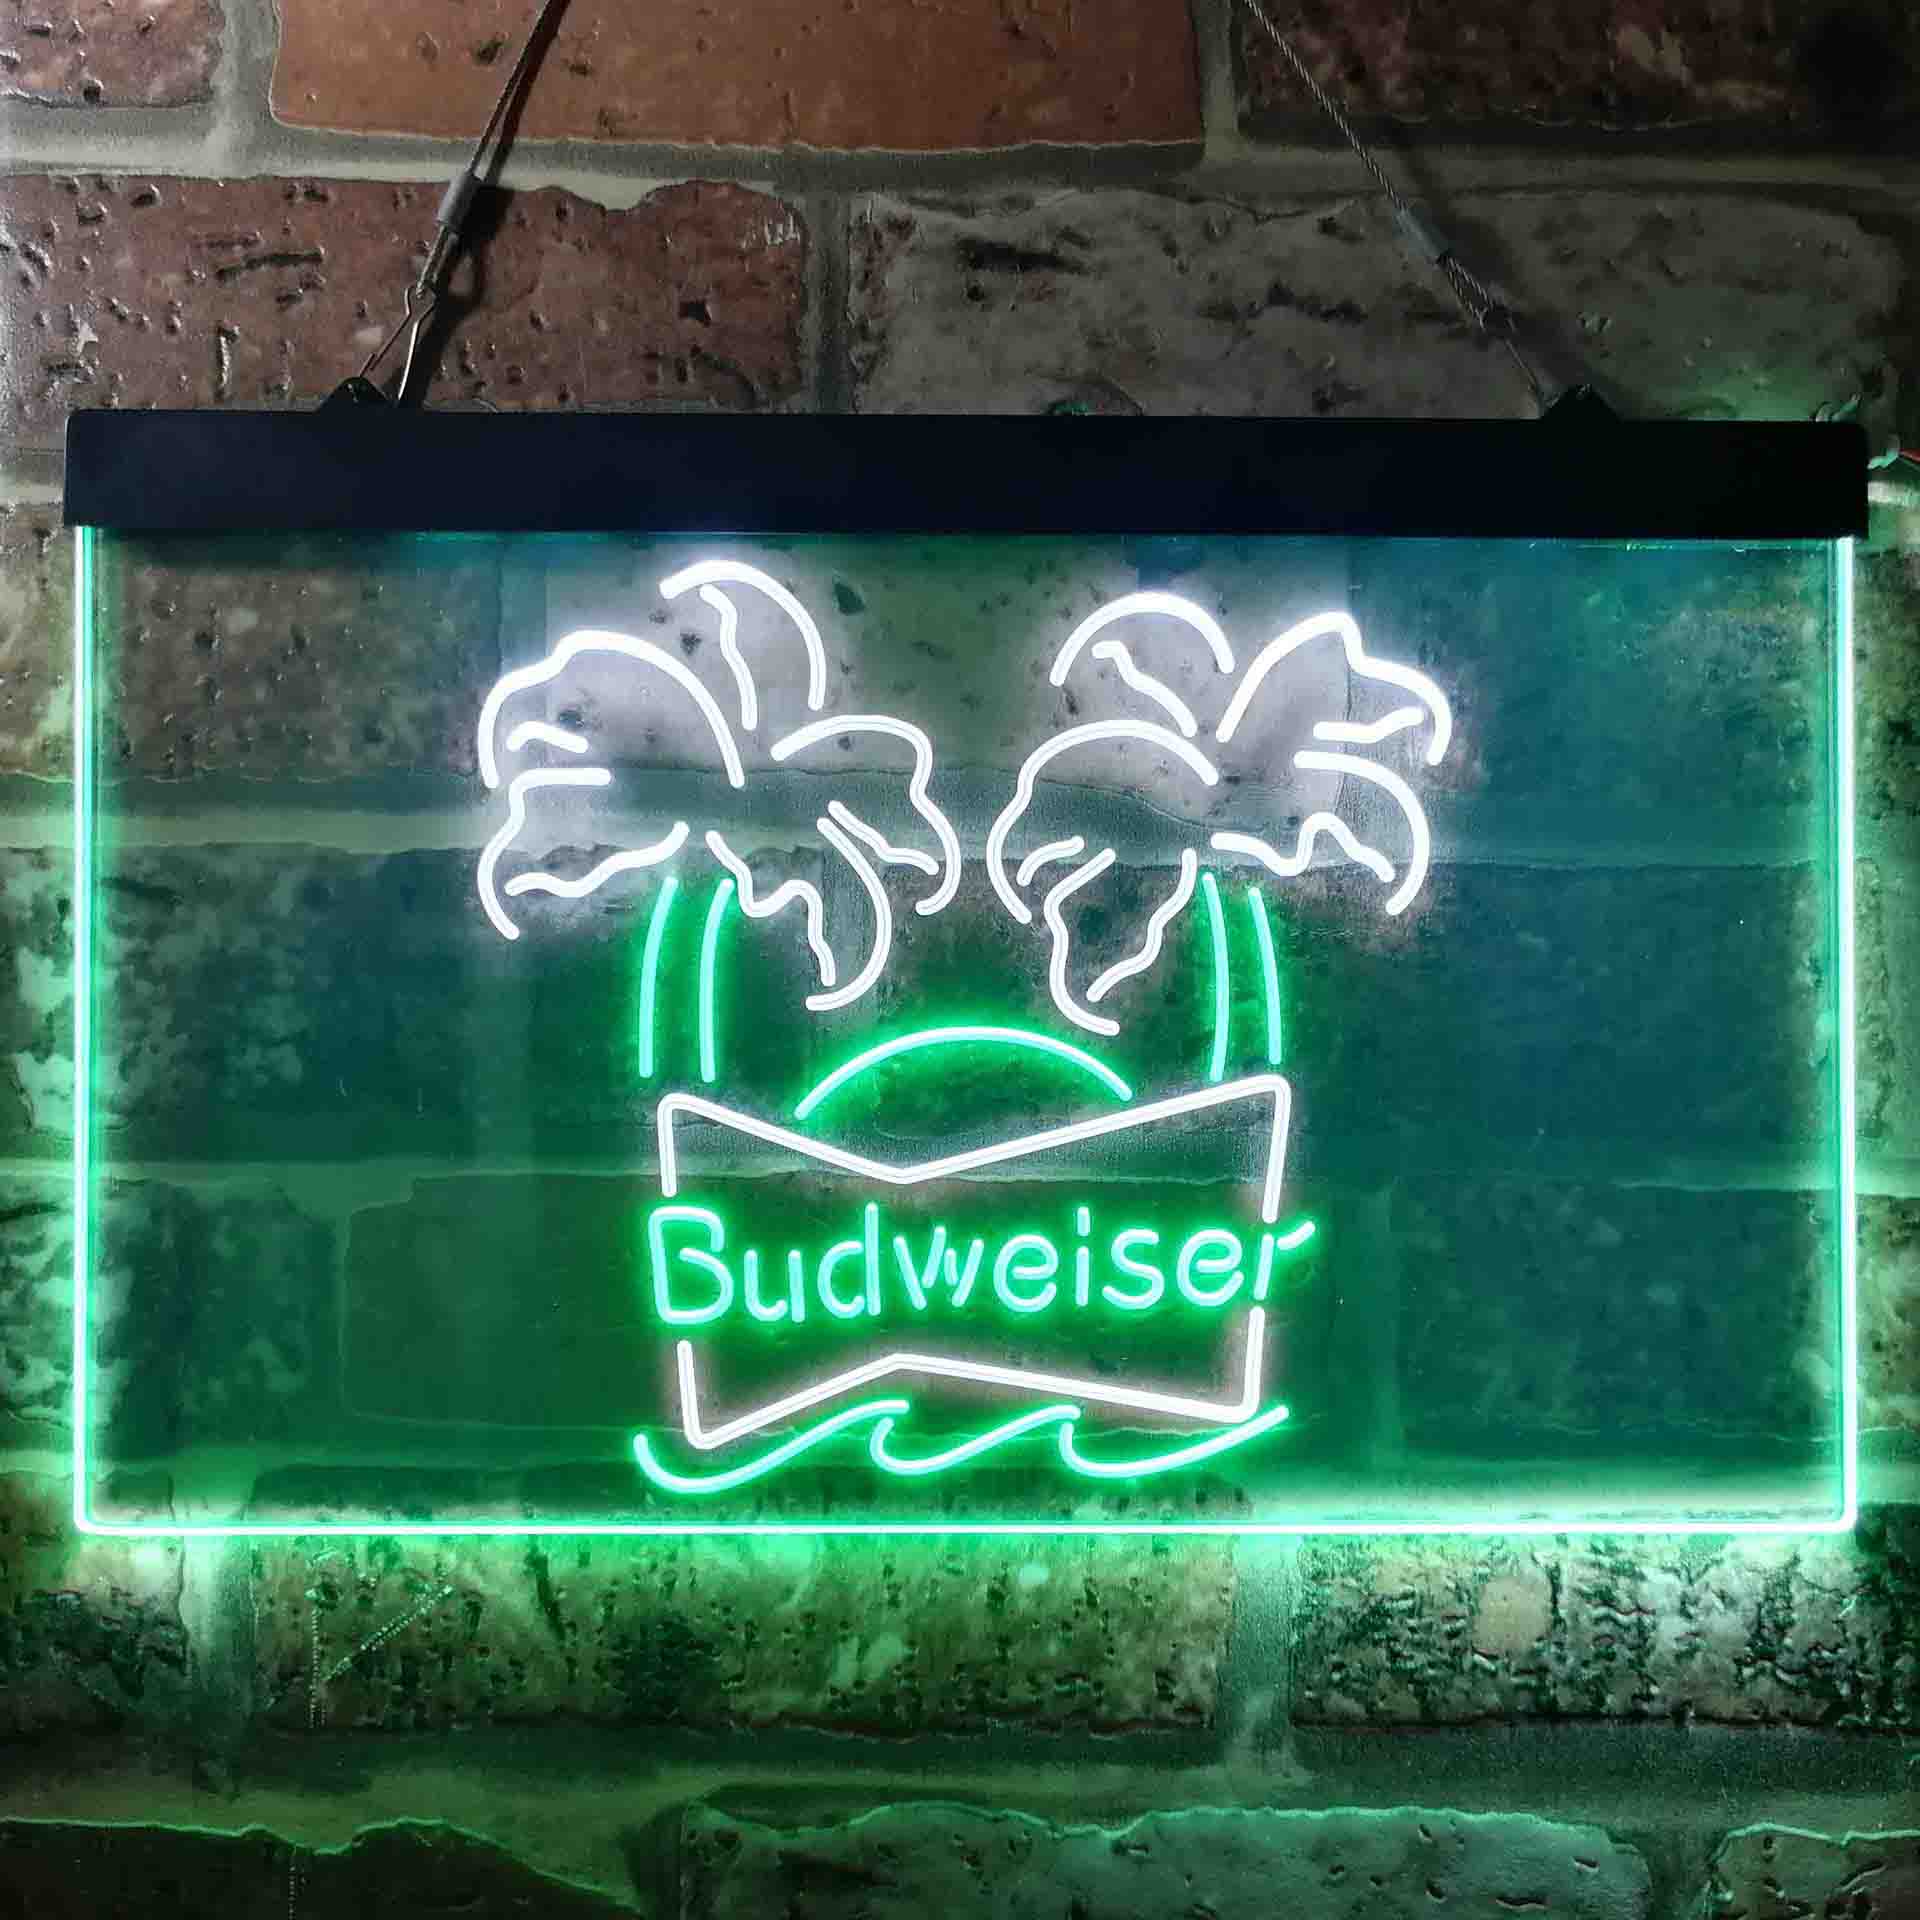 Budweiser Double Palm Tree Beer Neon-Like LED Sign